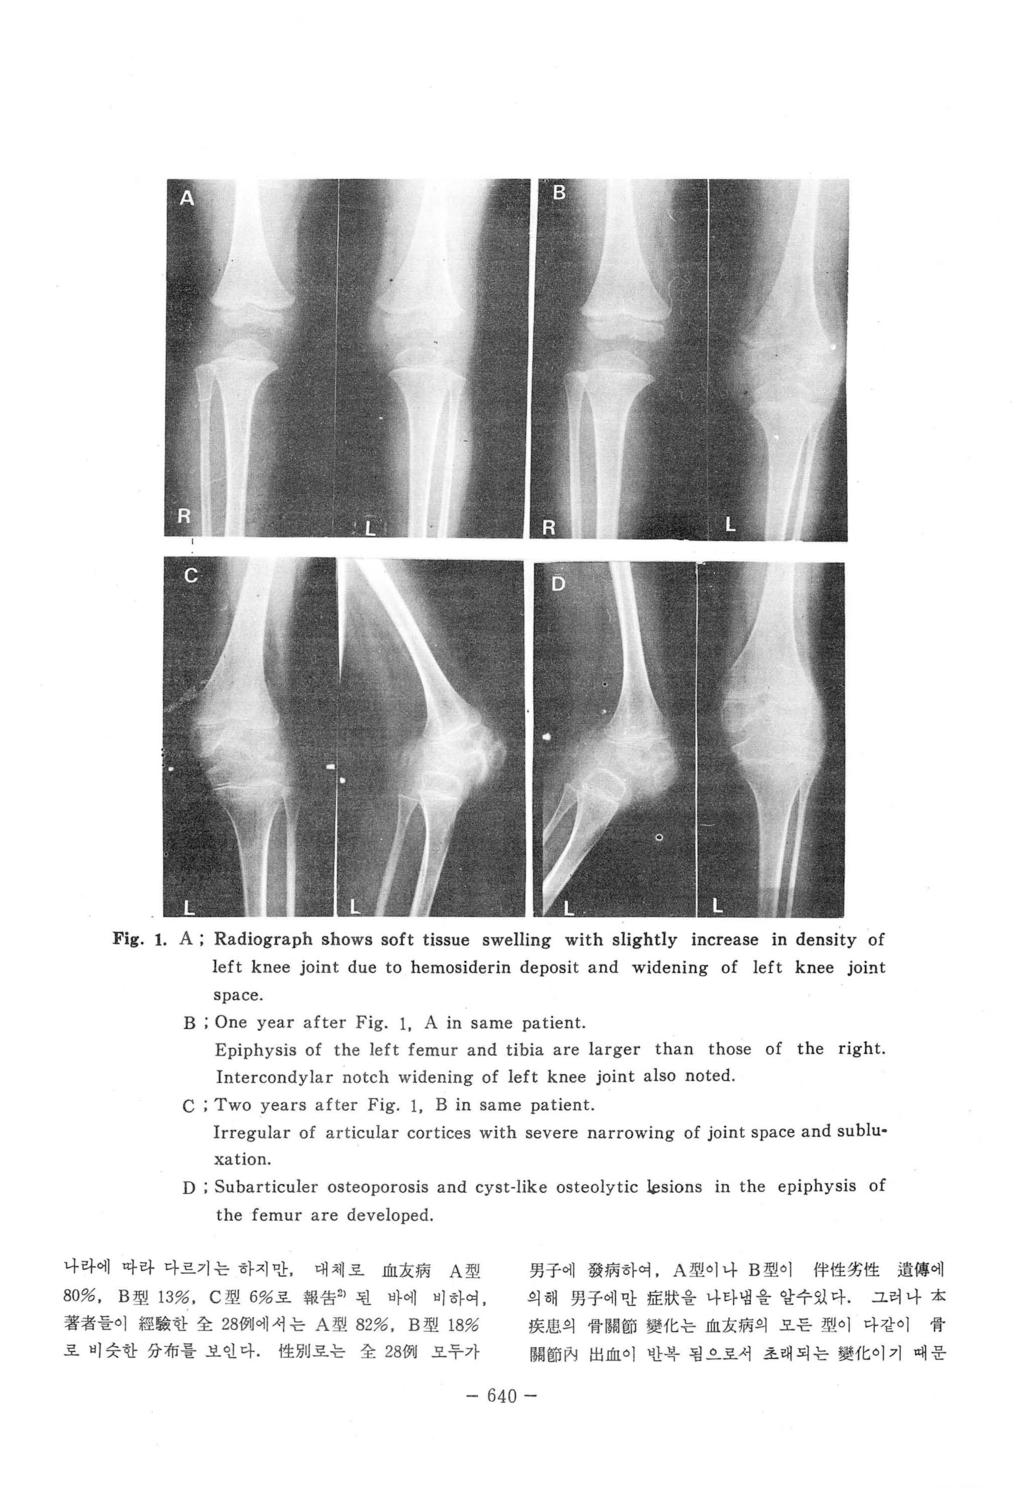 Fig. 1. A; Radiograph shows soft tissue swelling with slightly increase in density of Ieft knee joint due to hemosiderin deposit and widening of left knee joint space. B ; One year after Fig. 1. A in same patient.